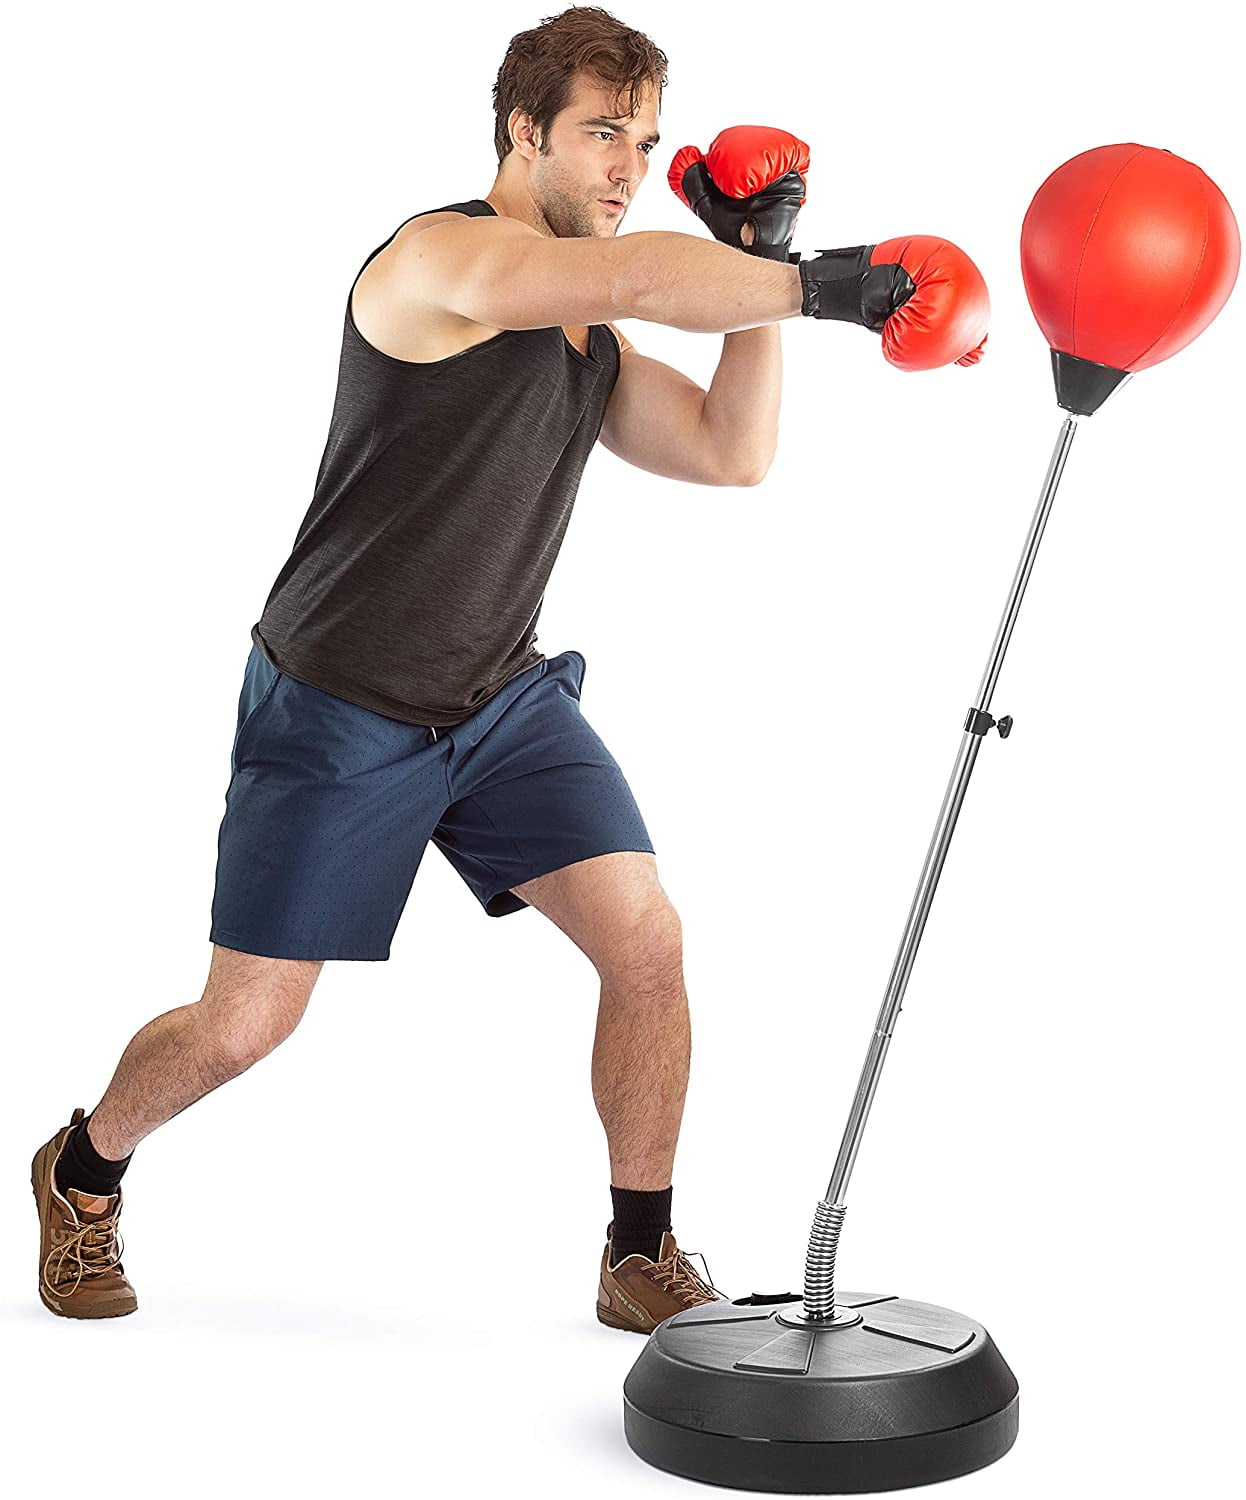 Adult Punch Ball Free Standing Adjustable With Boxing Bag Gloves Speed Training